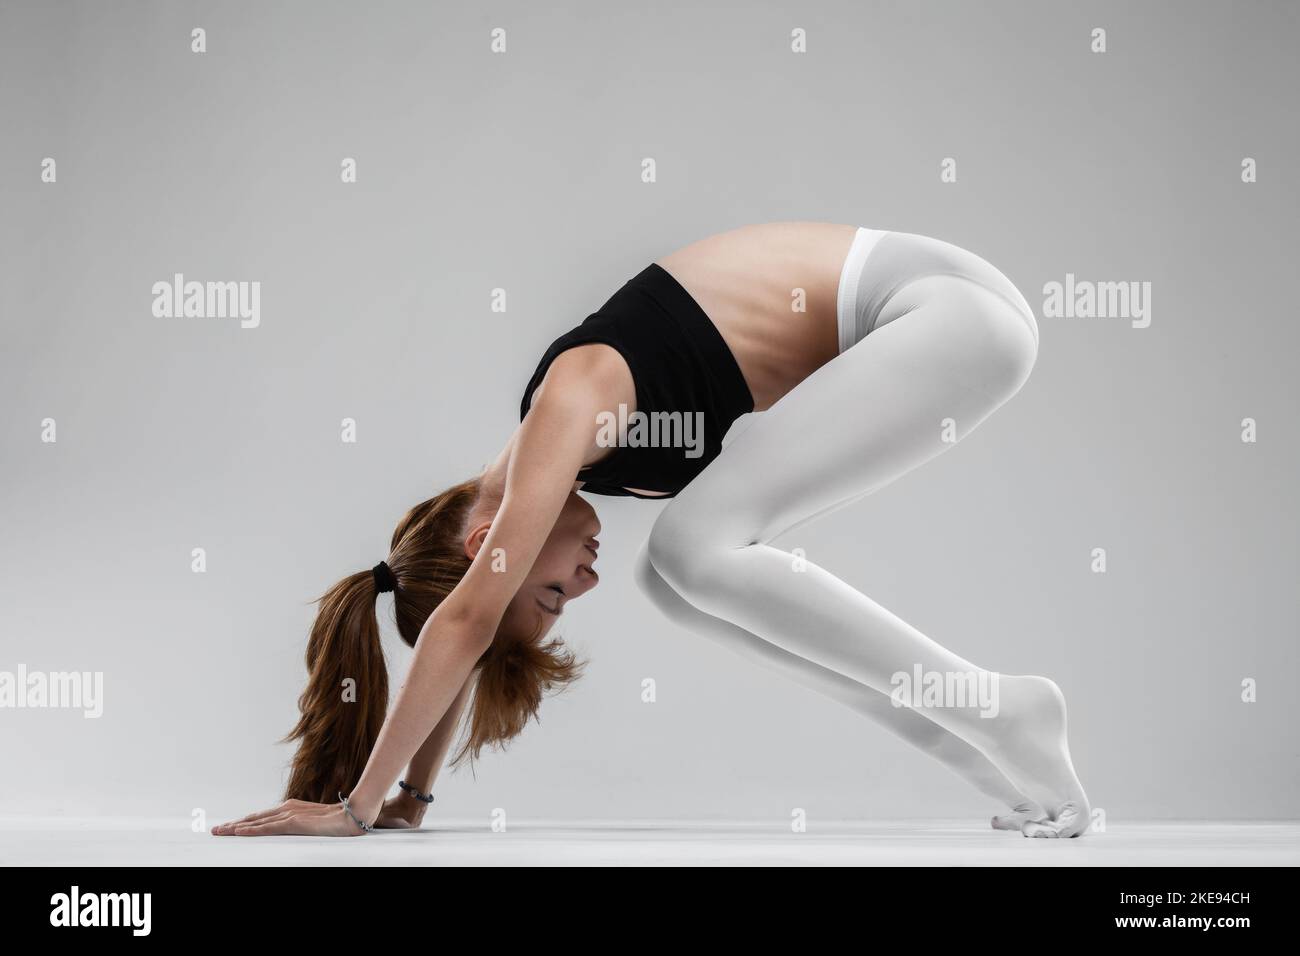 Fit ballerina girl stretching and practicing yoga poses against gray ...